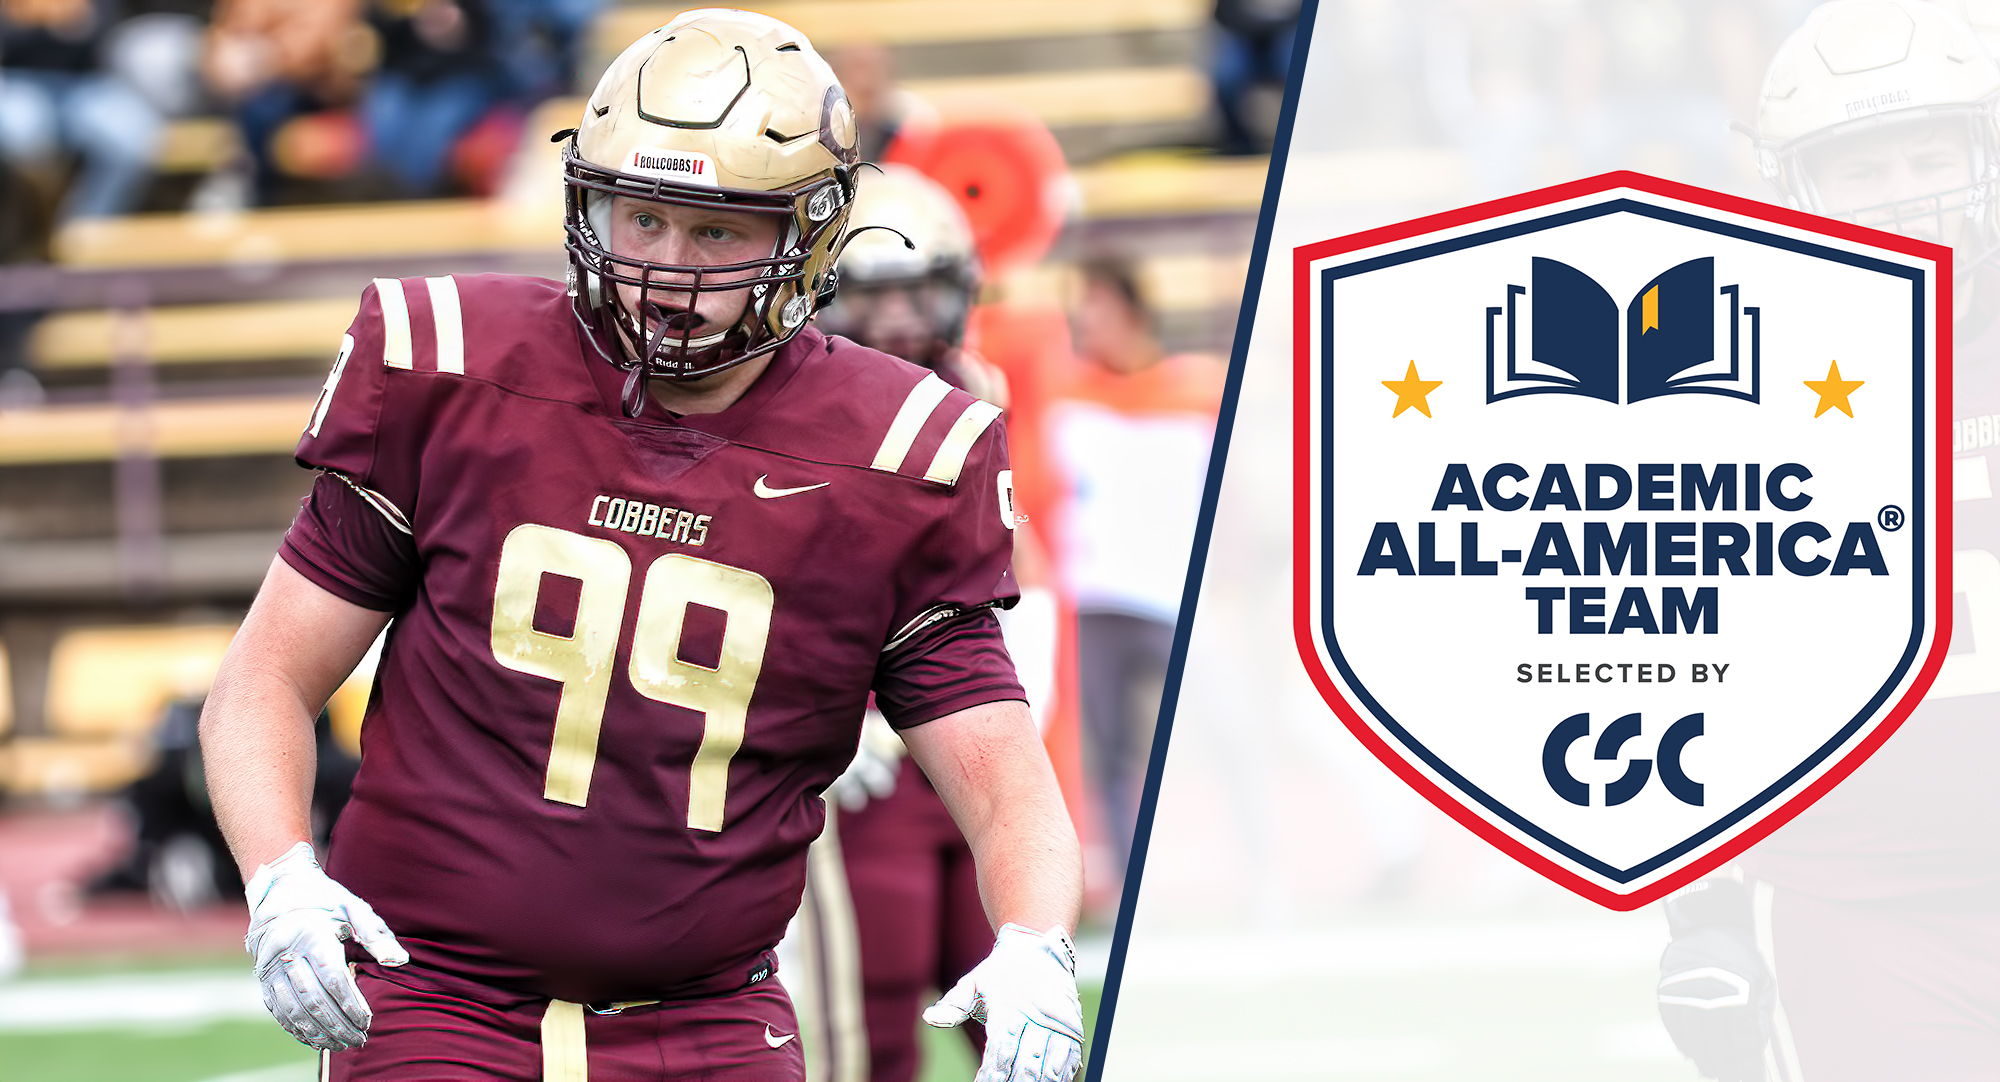 Defensive lineman Collin Thompson became the eighth player in Cobber football history to receive Academic All-American honors.